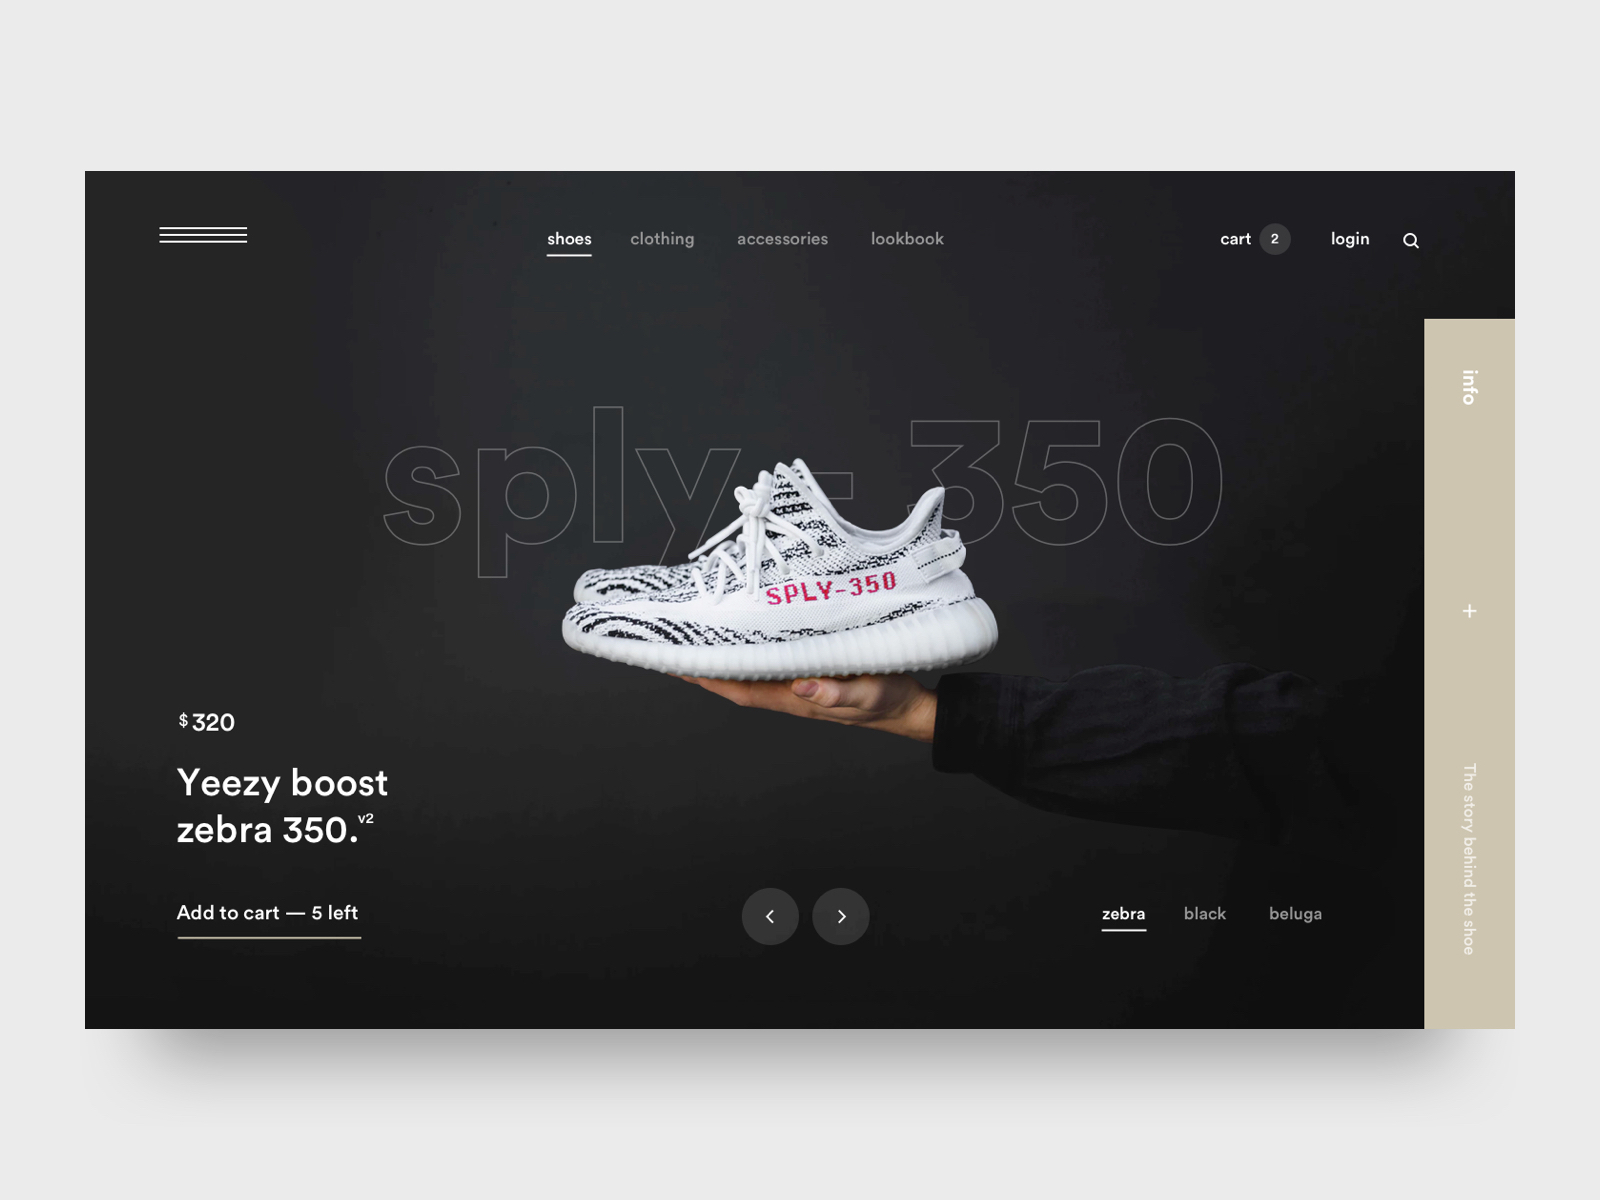 Yeezy designs, themes, templates and 